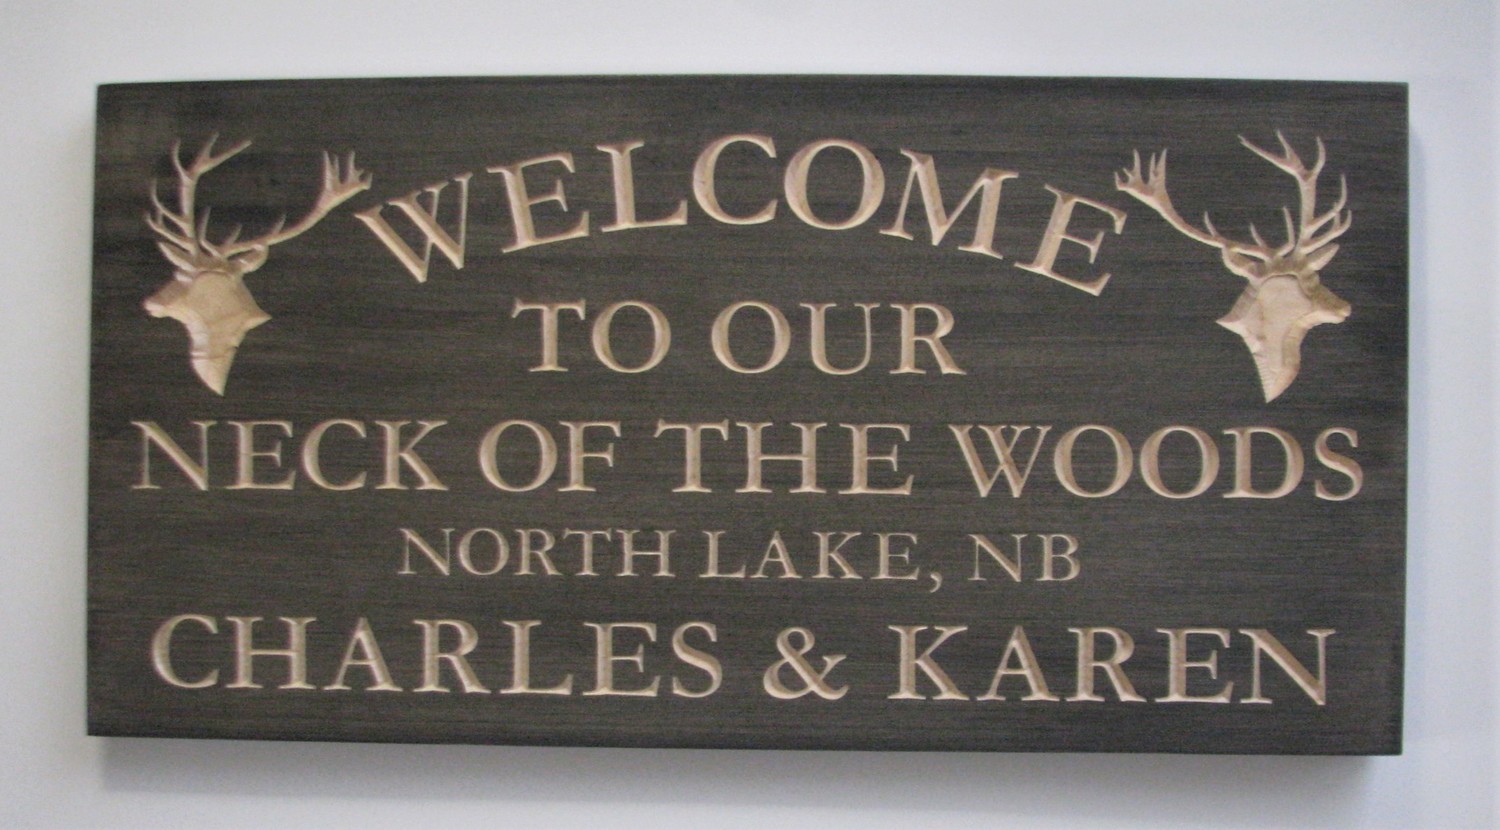 Custom Carved Stained Neck of the Woods Cottage Sign